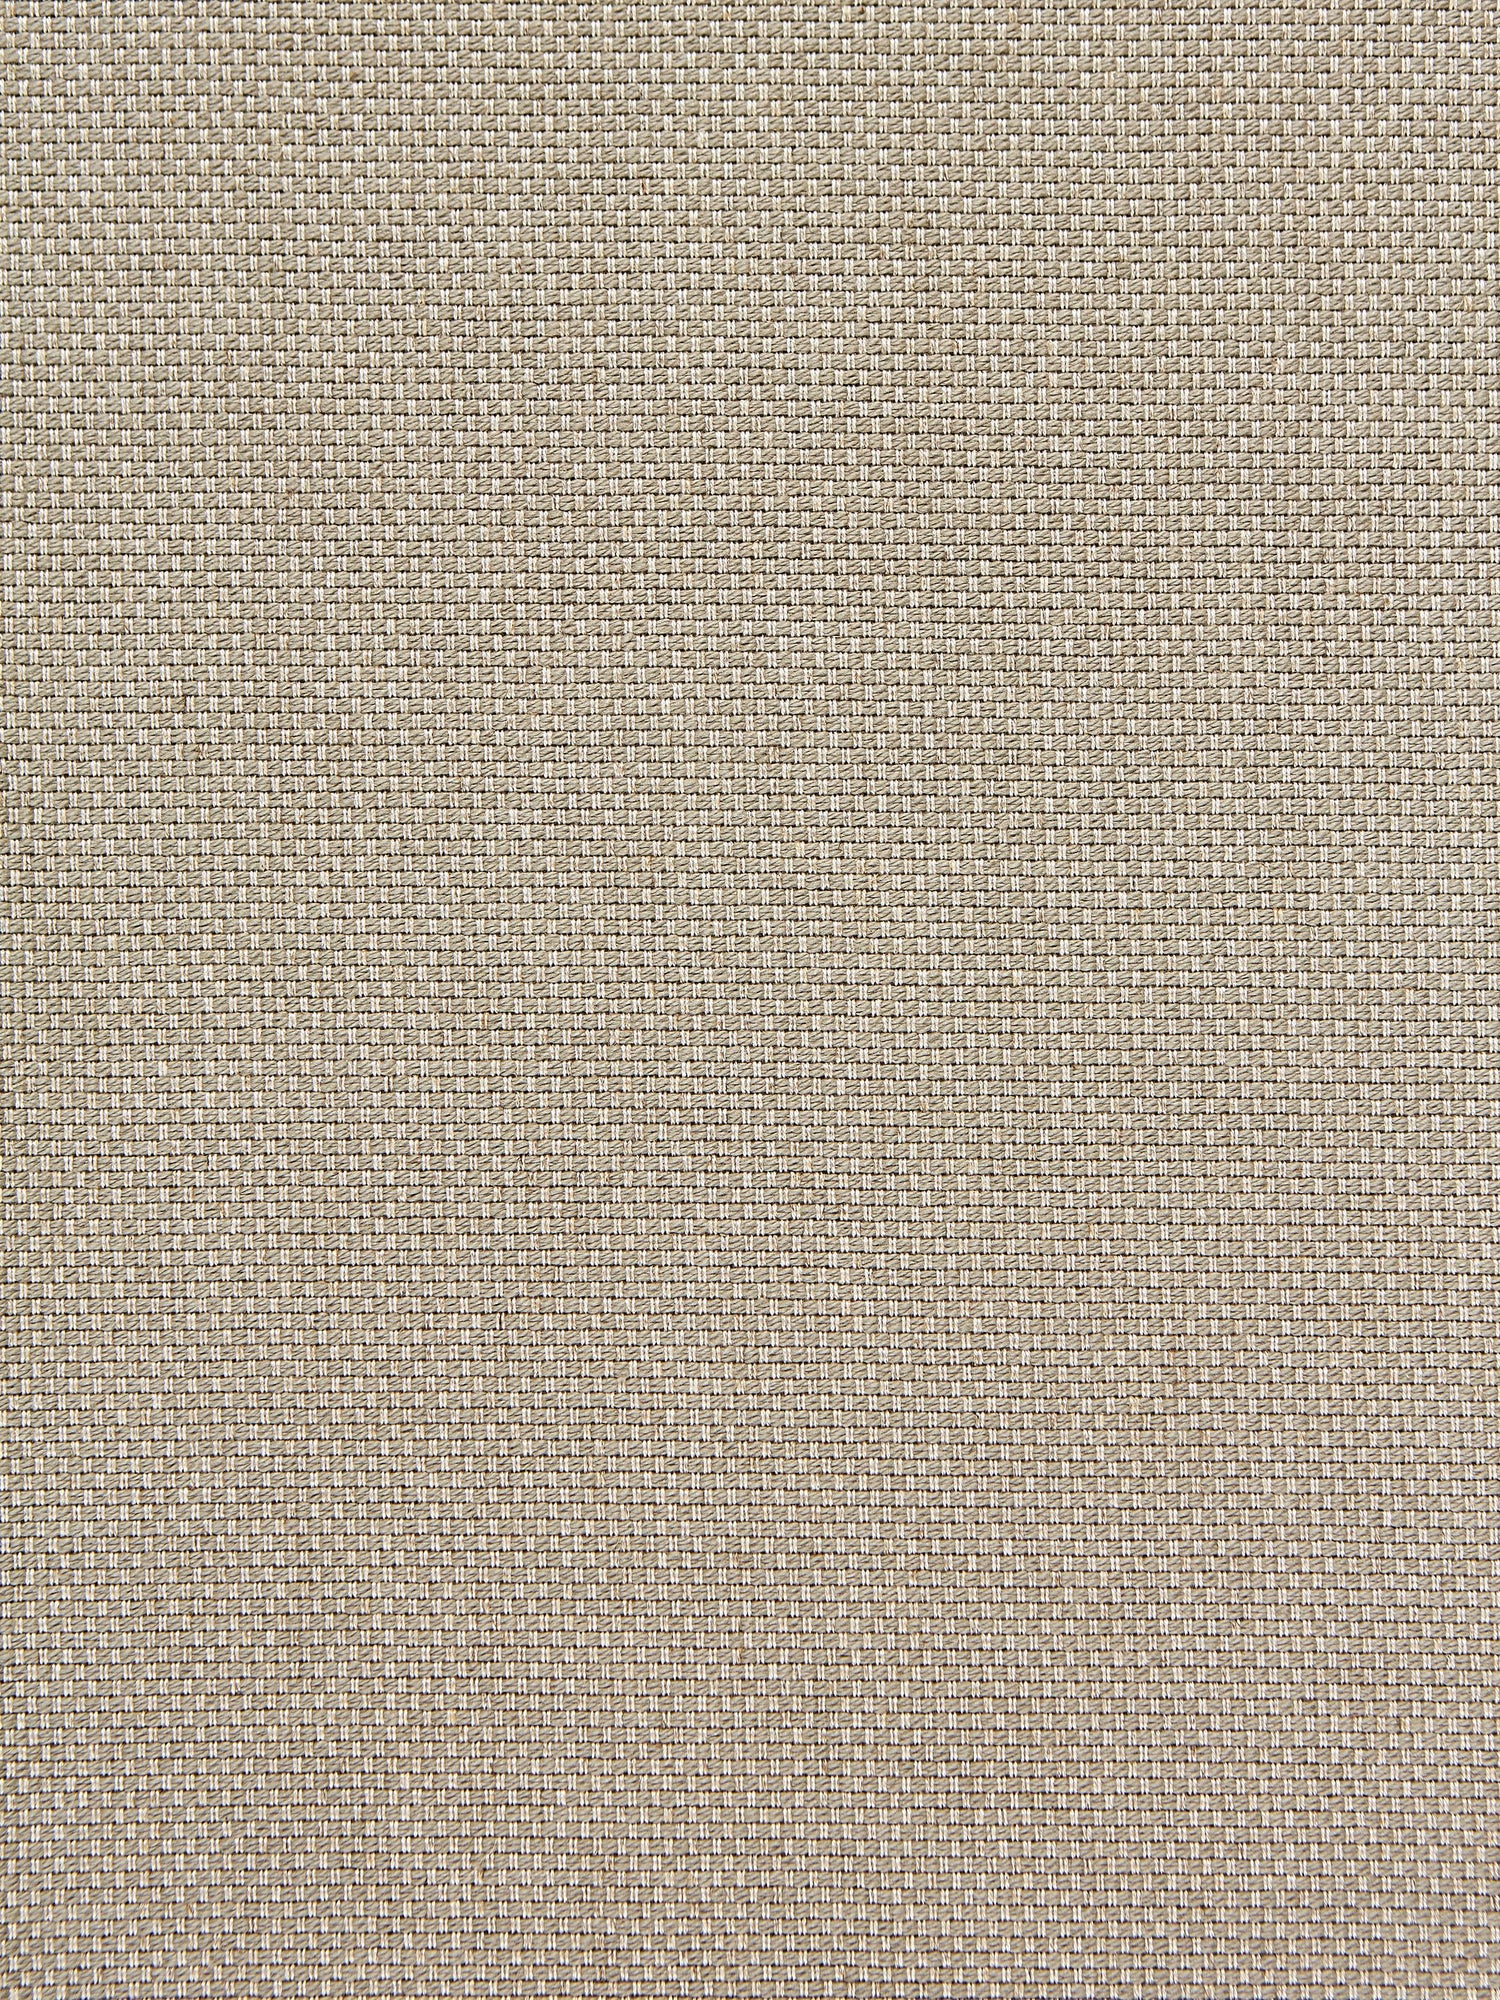 Prato Weave fabric in flax color - pattern number SC 000136393 - by Scalamandre in the Scalamandre Fabrics Book 1 collection